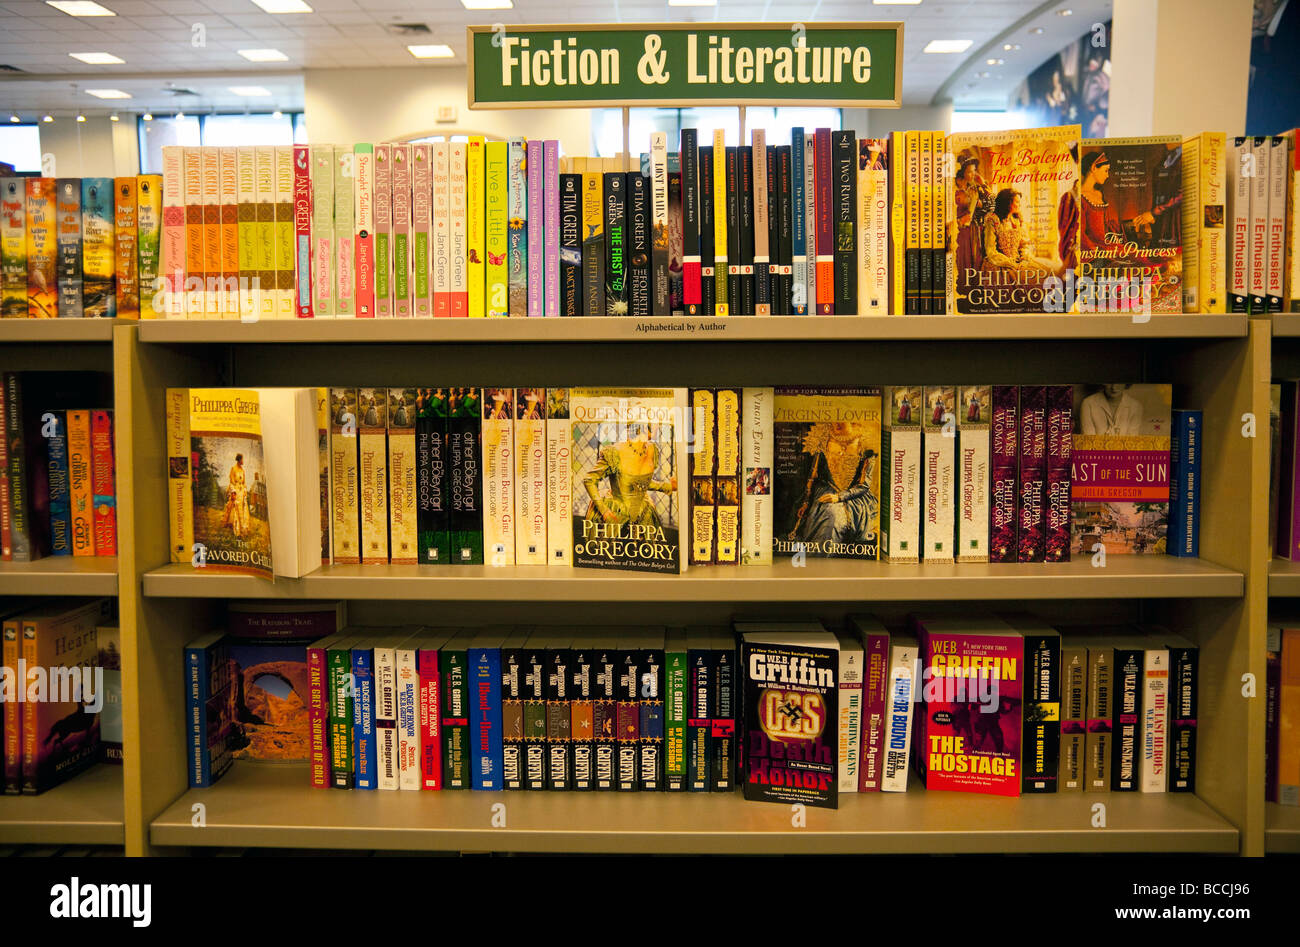 Fiction And Literature Books On Shelves